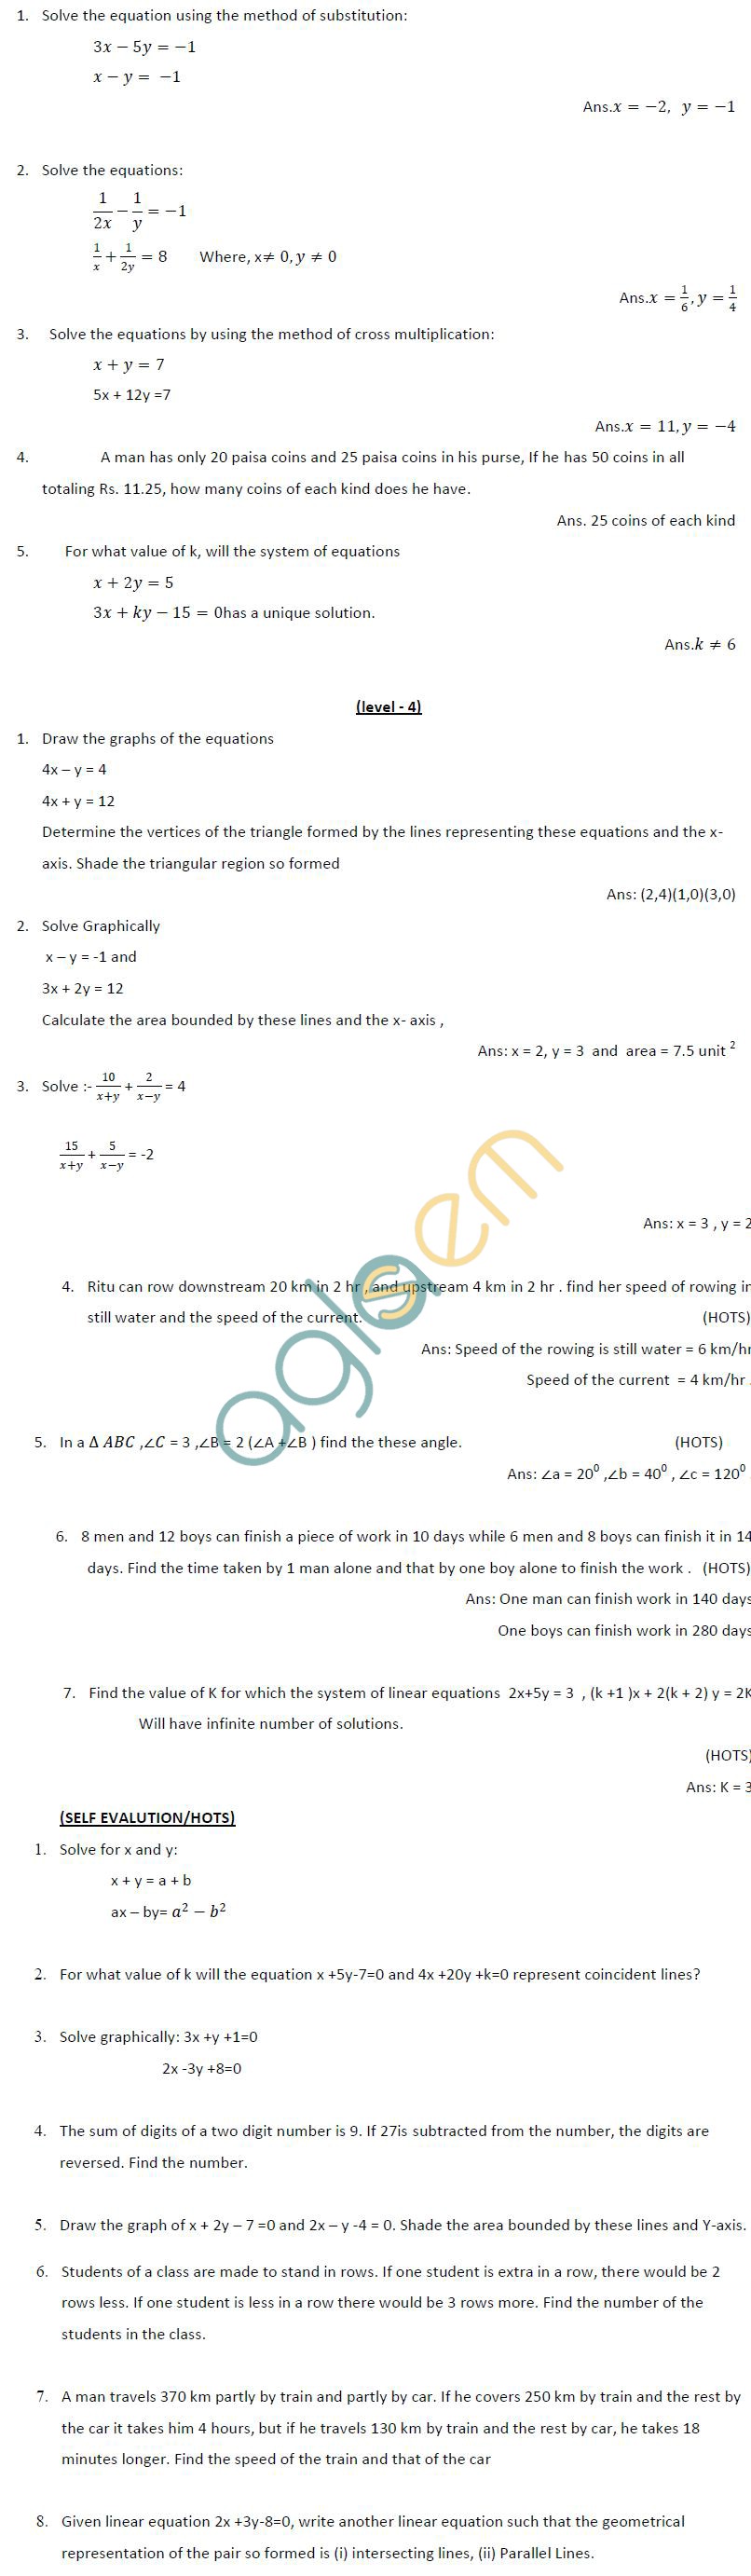 CBSE Class X: Maths - A pair of linear equations in two variables